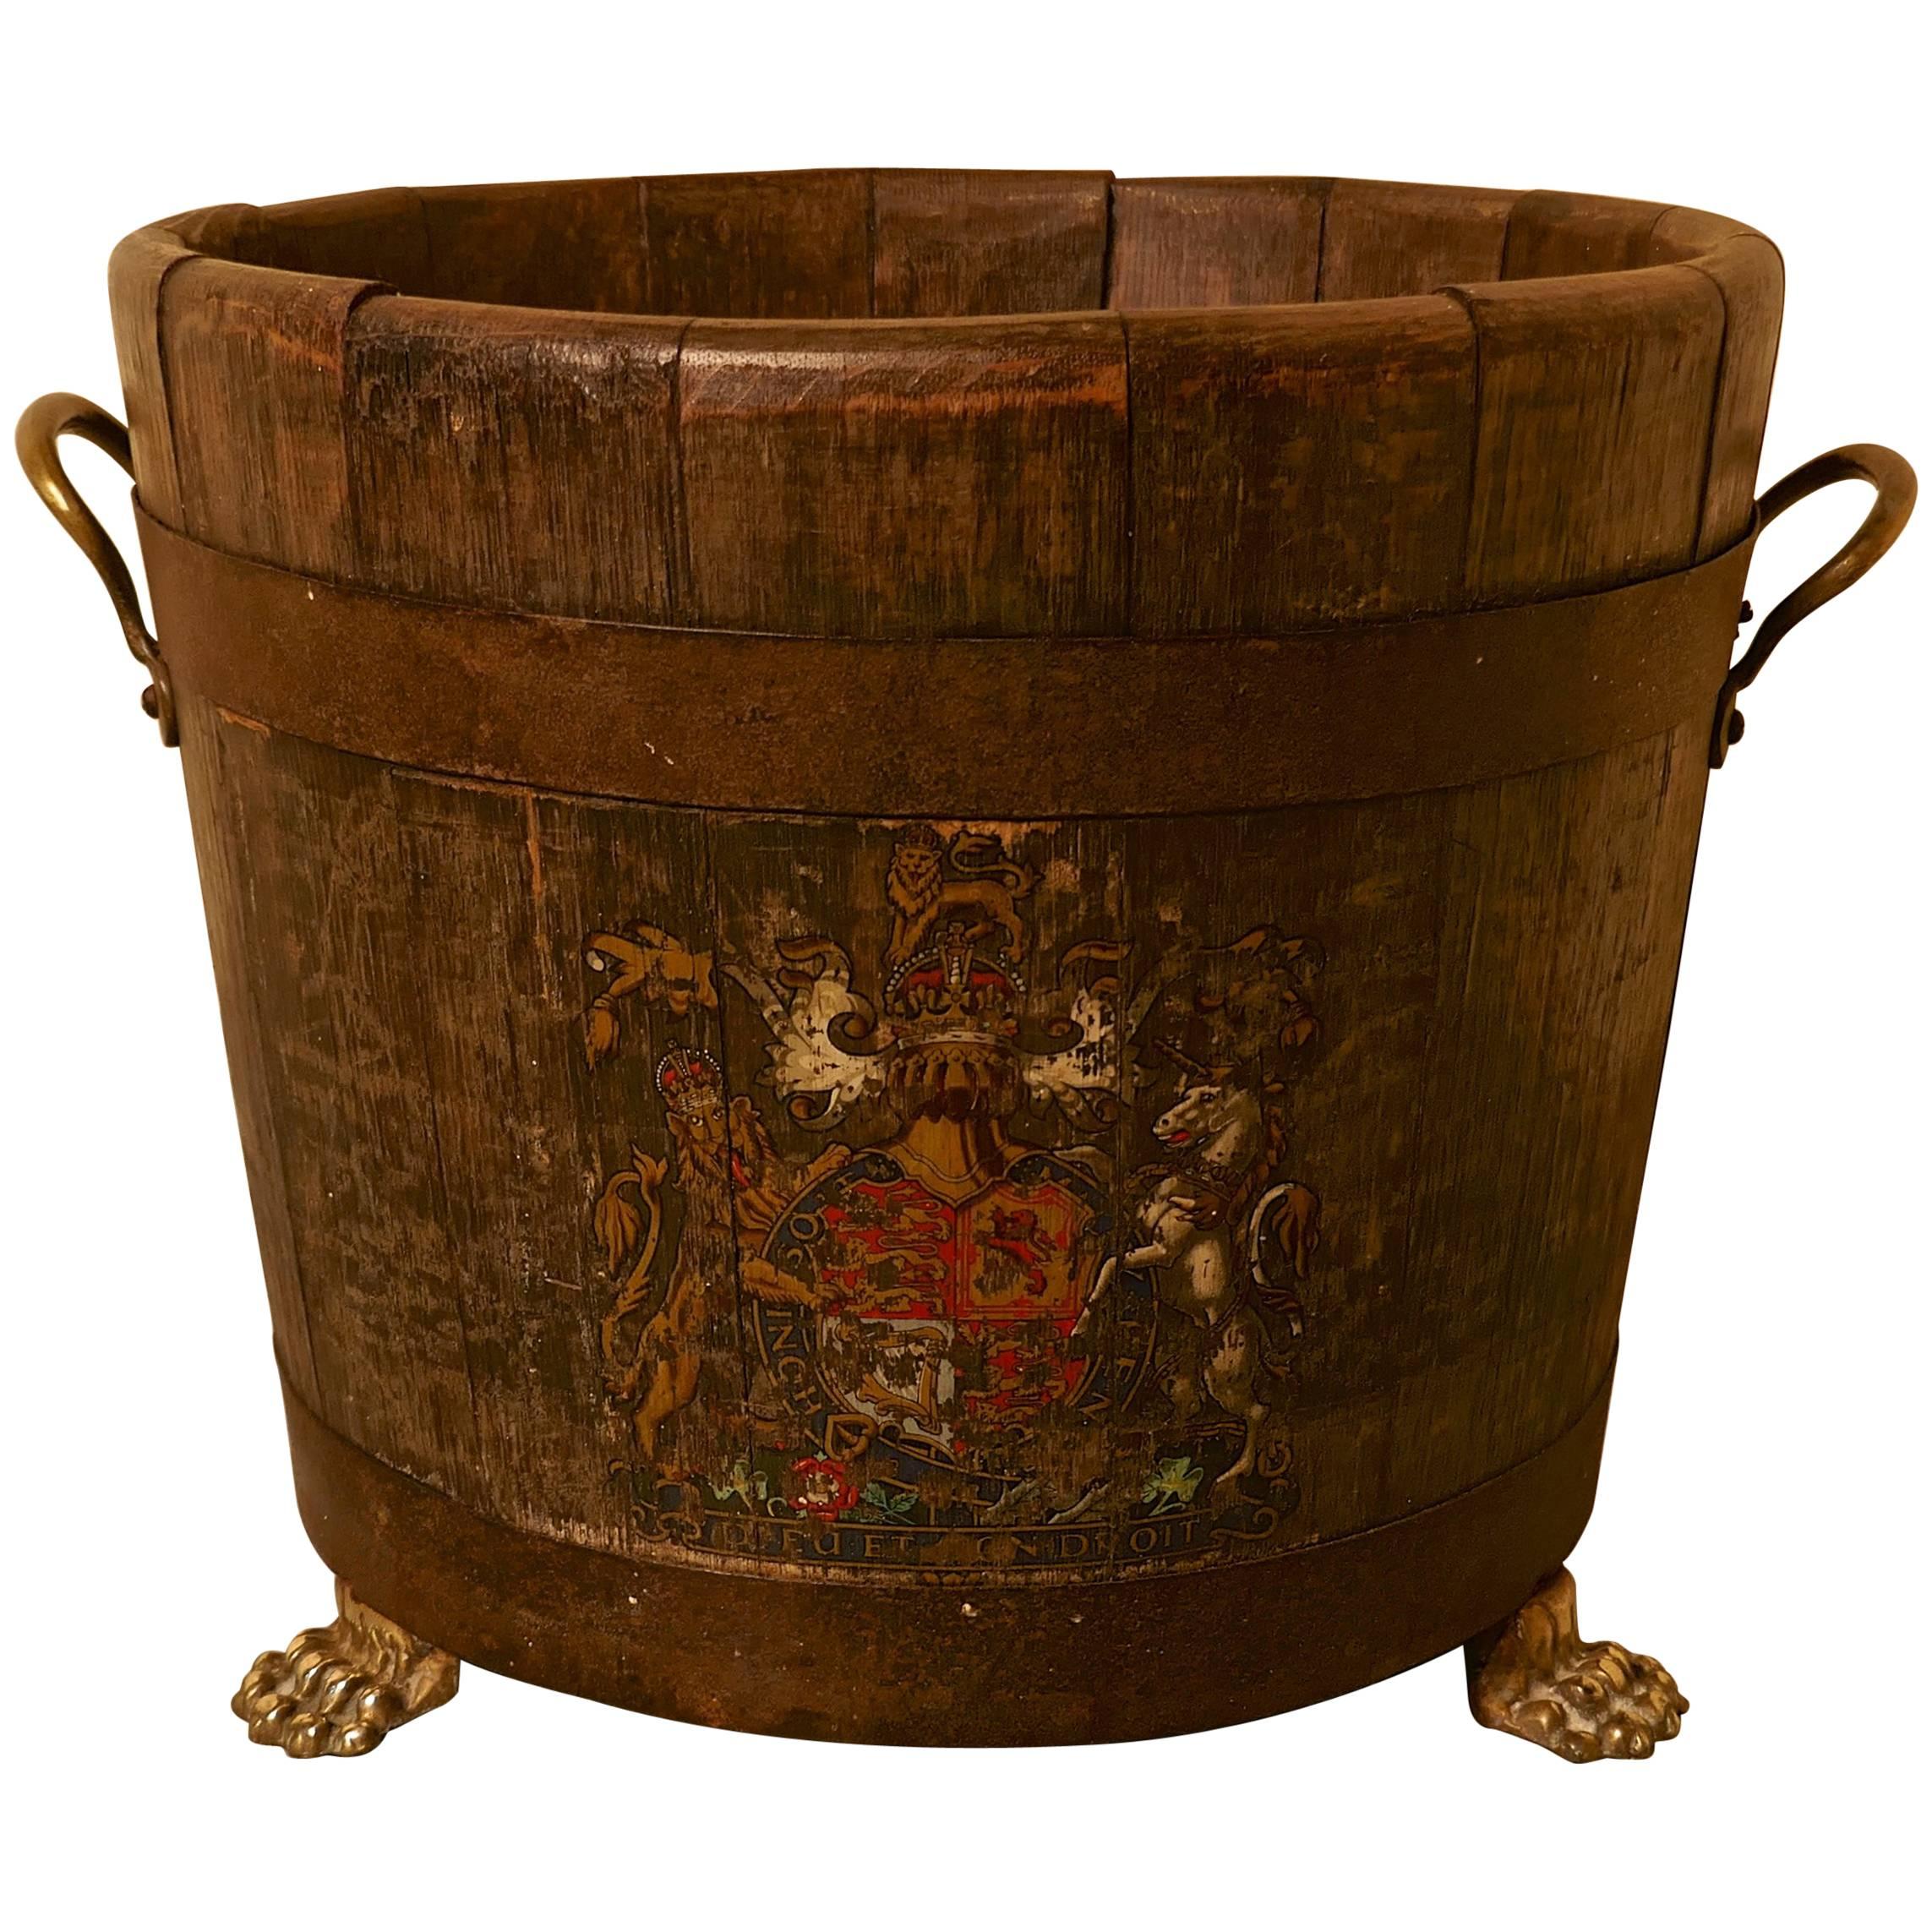 Oak Iron Bound Ships Barrel, with the Royal Coat of Arms